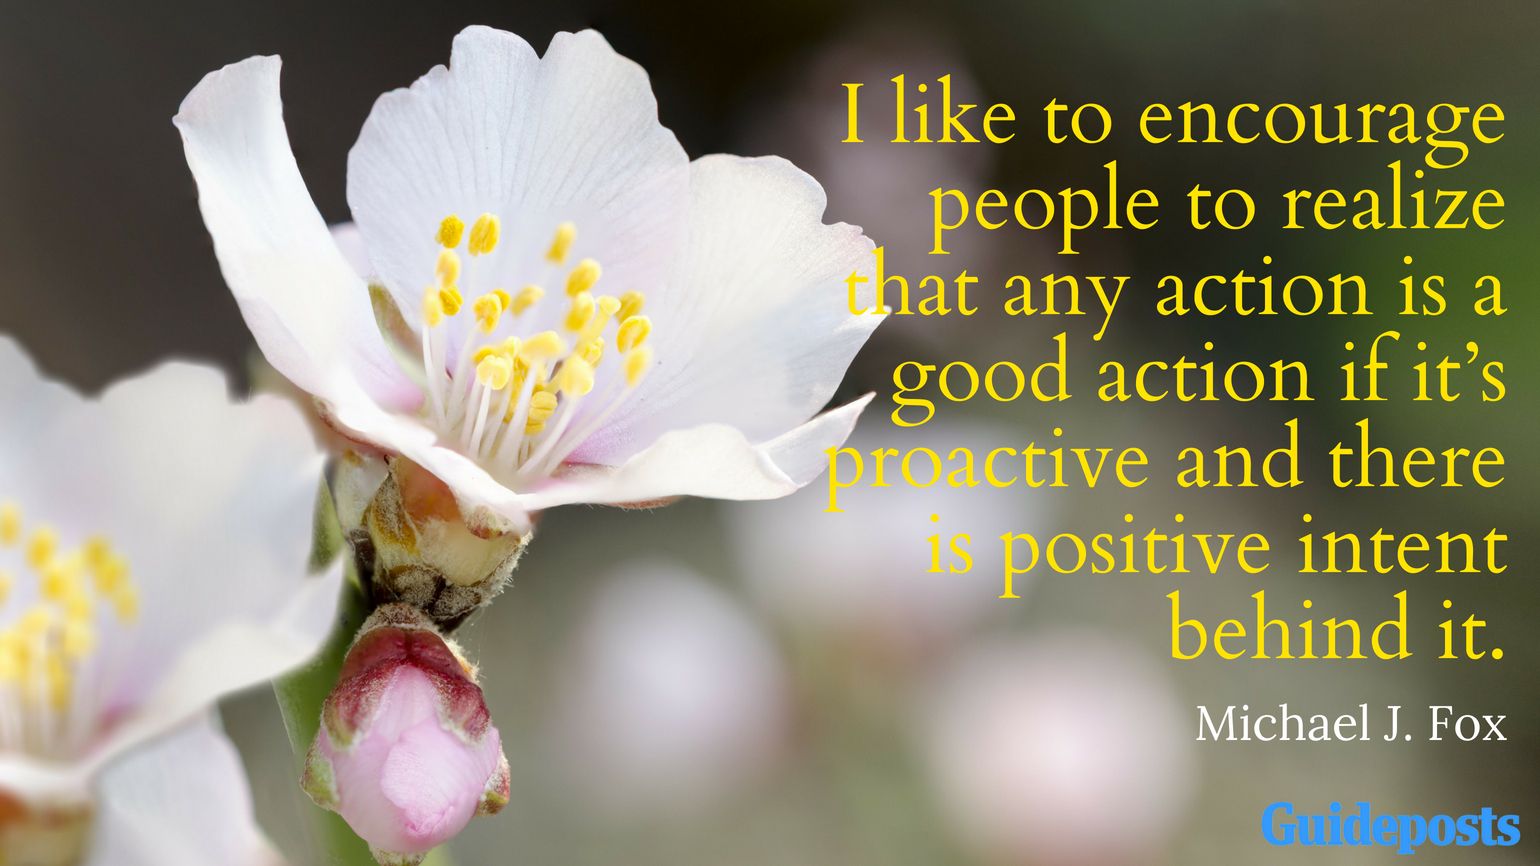 I like to encourage people to realize that any action is a good action if it’s proactive and there is positive intent behind it. Michael J. Fox